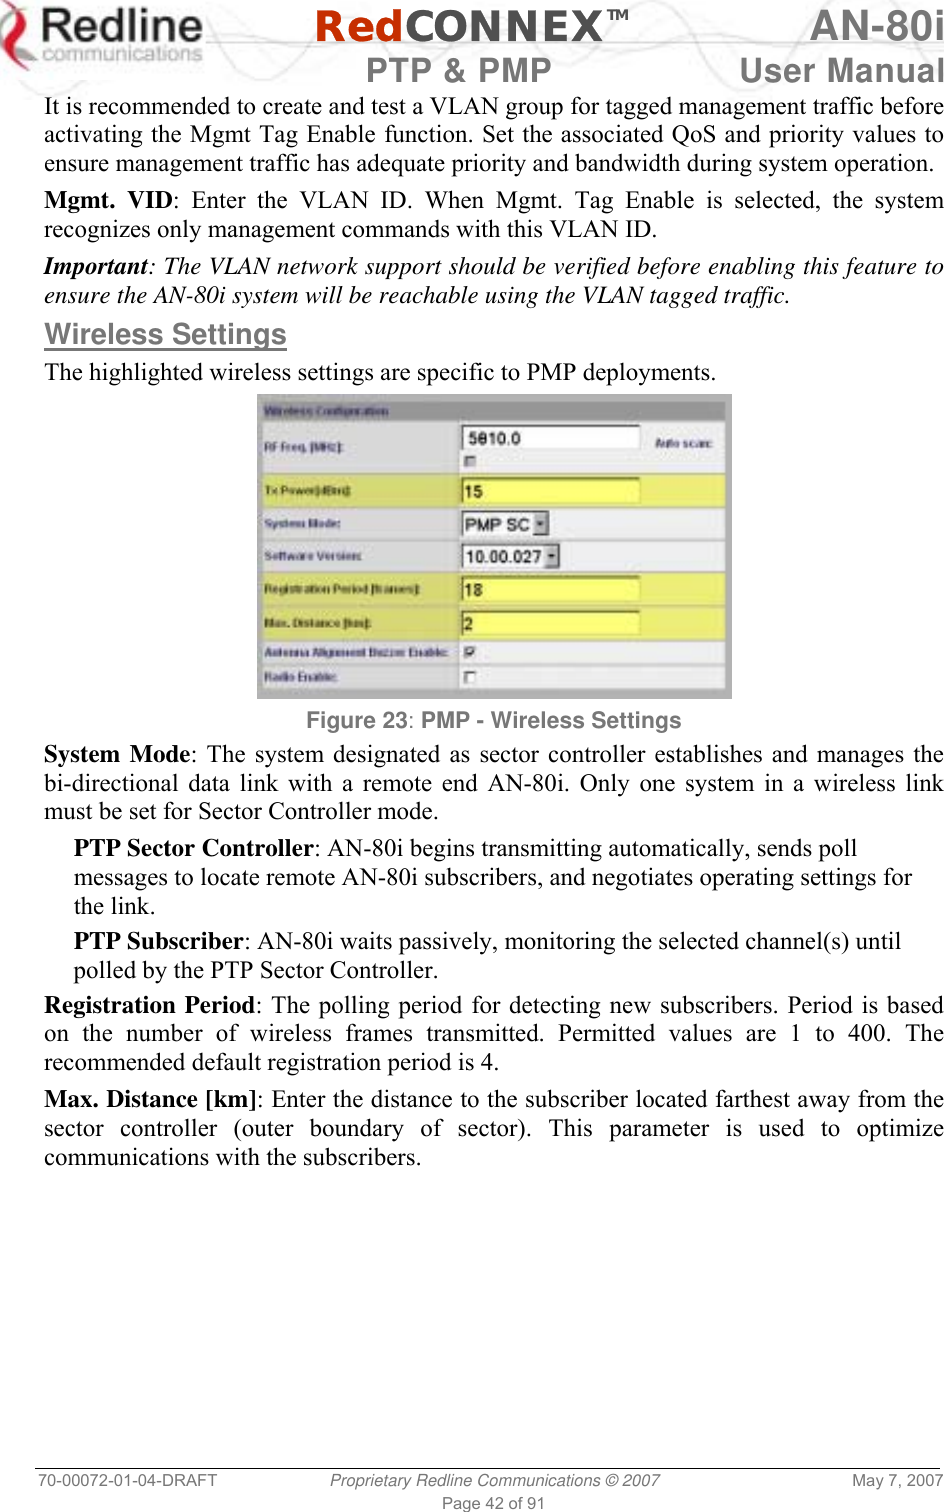   RedCONNEXTM AN-80i   PTP &amp; PMP  User Manual 70-00072-01-04-DRAFT  Proprietary Redline Communications © 2007  May 7, 2007 Page 42 of 91 It is recommended to create and test a VLAN group for tagged management traffic before activating the Mgmt Tag Enable function. Set the associated QoS and priority values to ensure management traffic has adequate priority and bandwidth during system operation. Mgmt. VID: Enter the VLAN ID. When Mgmt. Tag Enable is selected, the system recognizes only management commands with this VLAN ID. Important: The VLAN network support should be verified before enabling this feature to ensure the AN-80i system will be reachable using the VLAN tagged traffic.  Wireless Settings The highlighted wireless settings are specific to PMP deployments.  Figure 23: PMP - Wireless Settings System Mode: The system designated as sector controller establishes and manages the bi-directional data link with a remote end AN-80i. Only one system in a wireless link must be set for Sector Controller mode. PTP Sector Controller: AN-80i begins transmitting automatically, sends poll messages to locate remote AN-80i subscribers, and negotiates operating settings for the link. PTP Subscriber: AN-80i waits passively, monitoring the selected channel(s) until polled by the PTP Sector Controller. Registration Period: The polling period for detecting new subscribers. Period is based on the number of wireless frames transmitted. Permitted values are 1 to 400. The recommended default registration period is 4. Max. Distance [km]: Enter the distance to the subscriber located farthest away from the sector controller (outer boundary of sector). This parameter is used to optimize communications with the subscribers. 